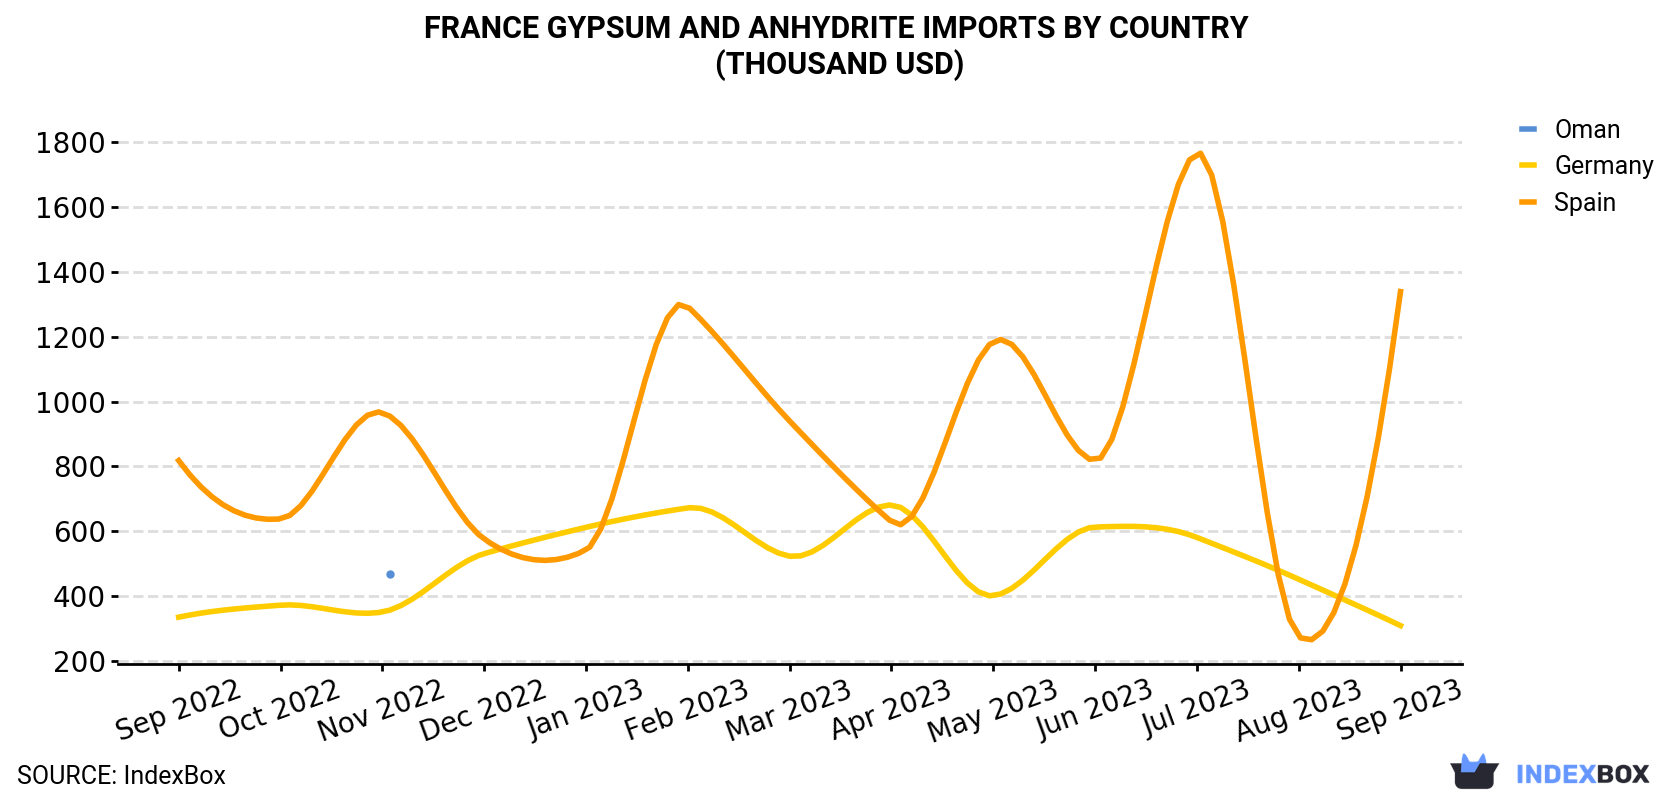 France Gypsum And Anhydrite Imports By Country (Thousand USD)